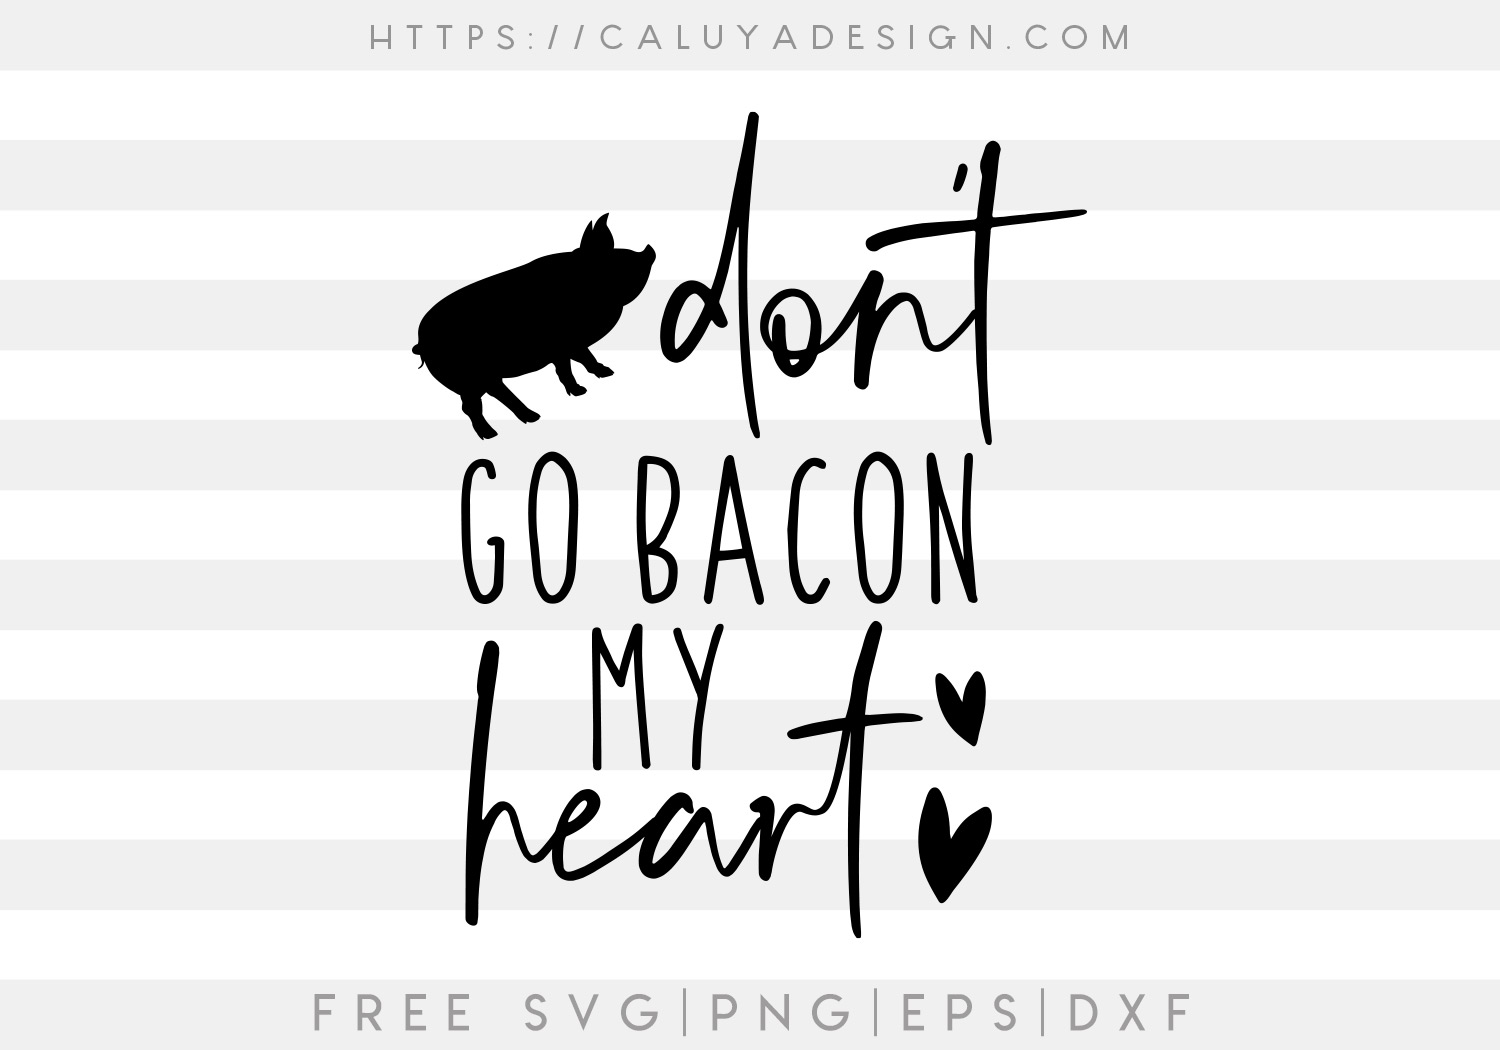 Don’t Go Bacon My Heart SVG, PNG, EPS & DXF